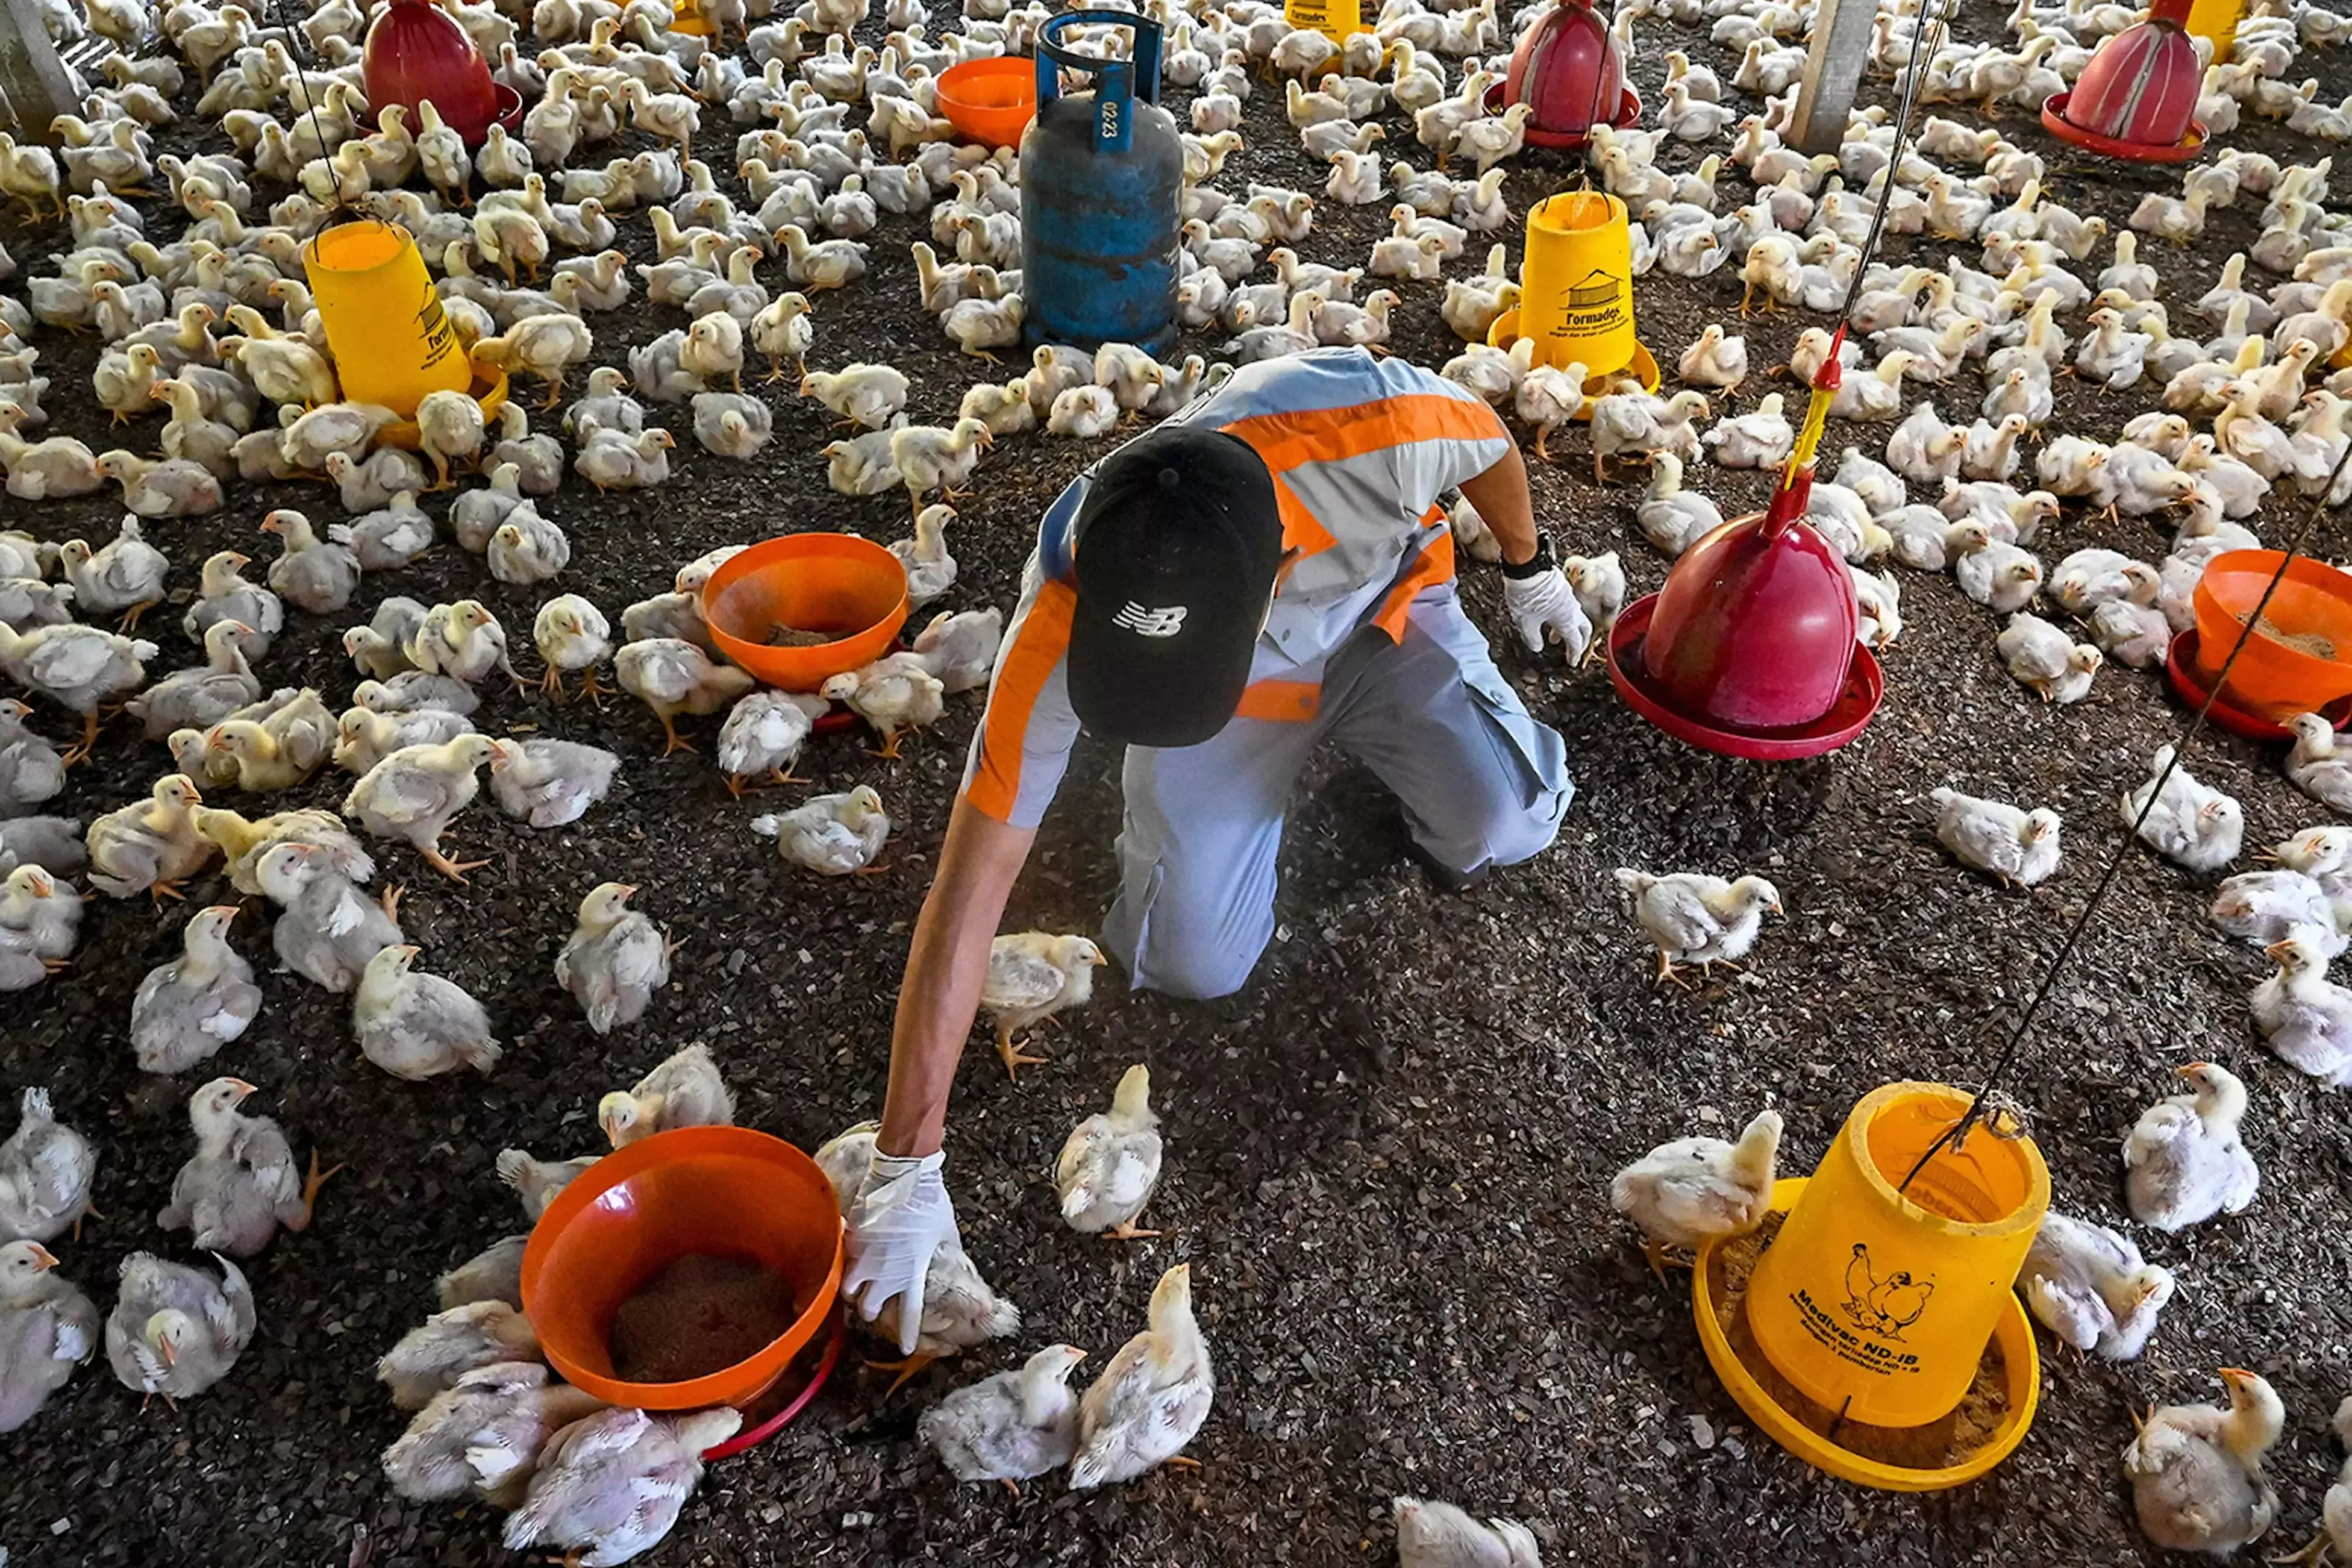 An Indonesian government worker examines chicks for signs of avian flu at a poultry farm.